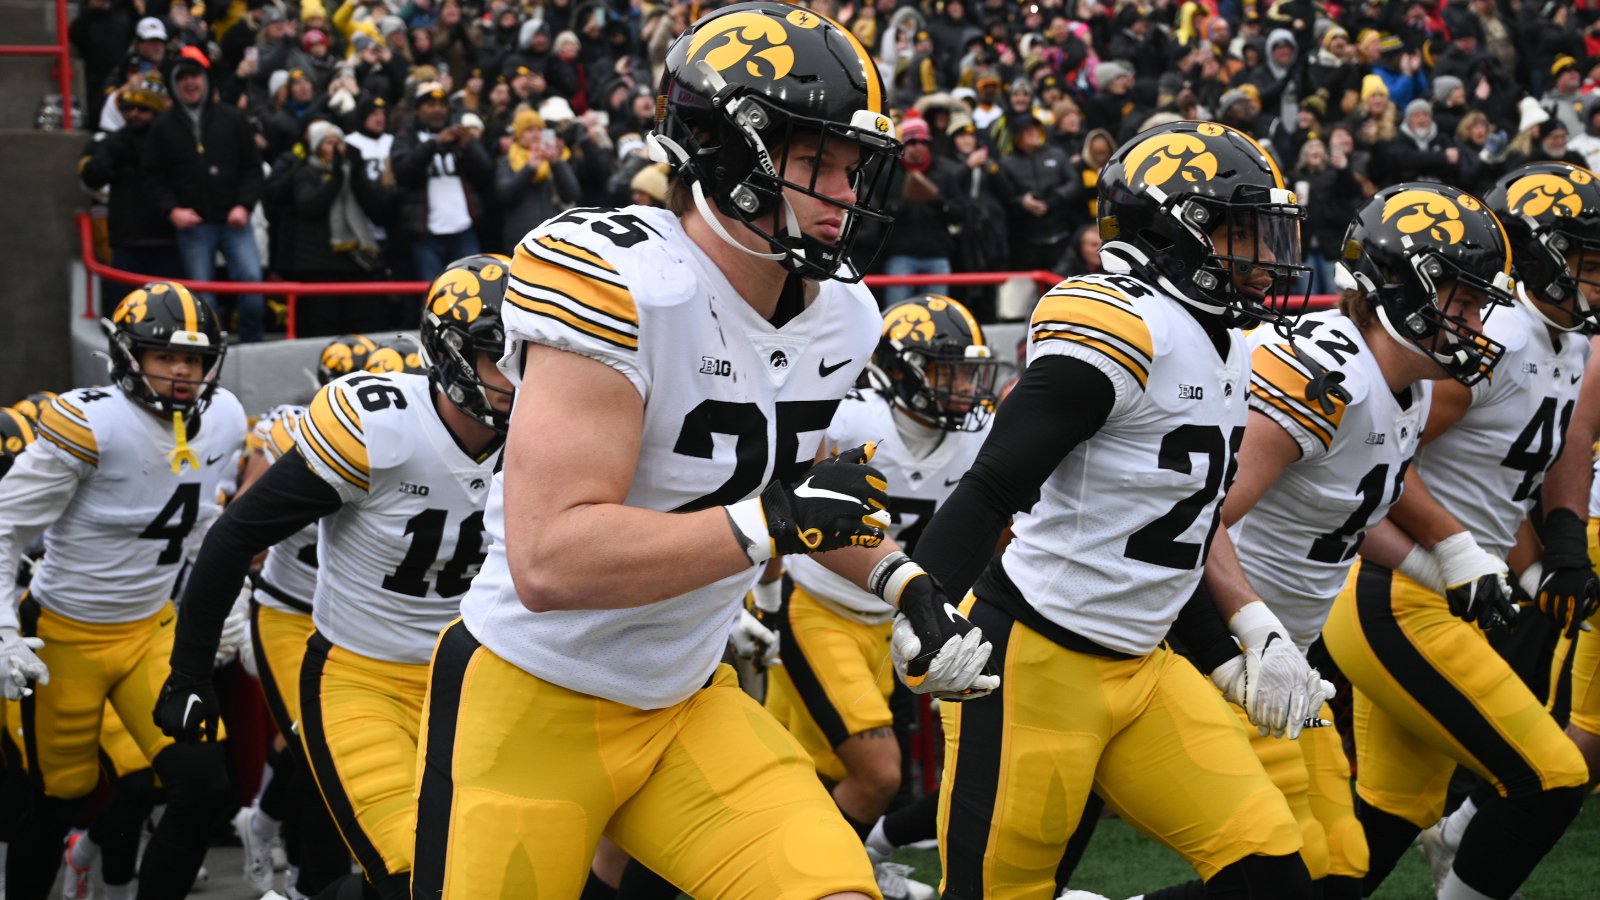 Iowa Reaches New Low As Sportsbooks Dare Gamblers To Bet On Hawkeyes Scoring Just 1 Point Vs Michigan